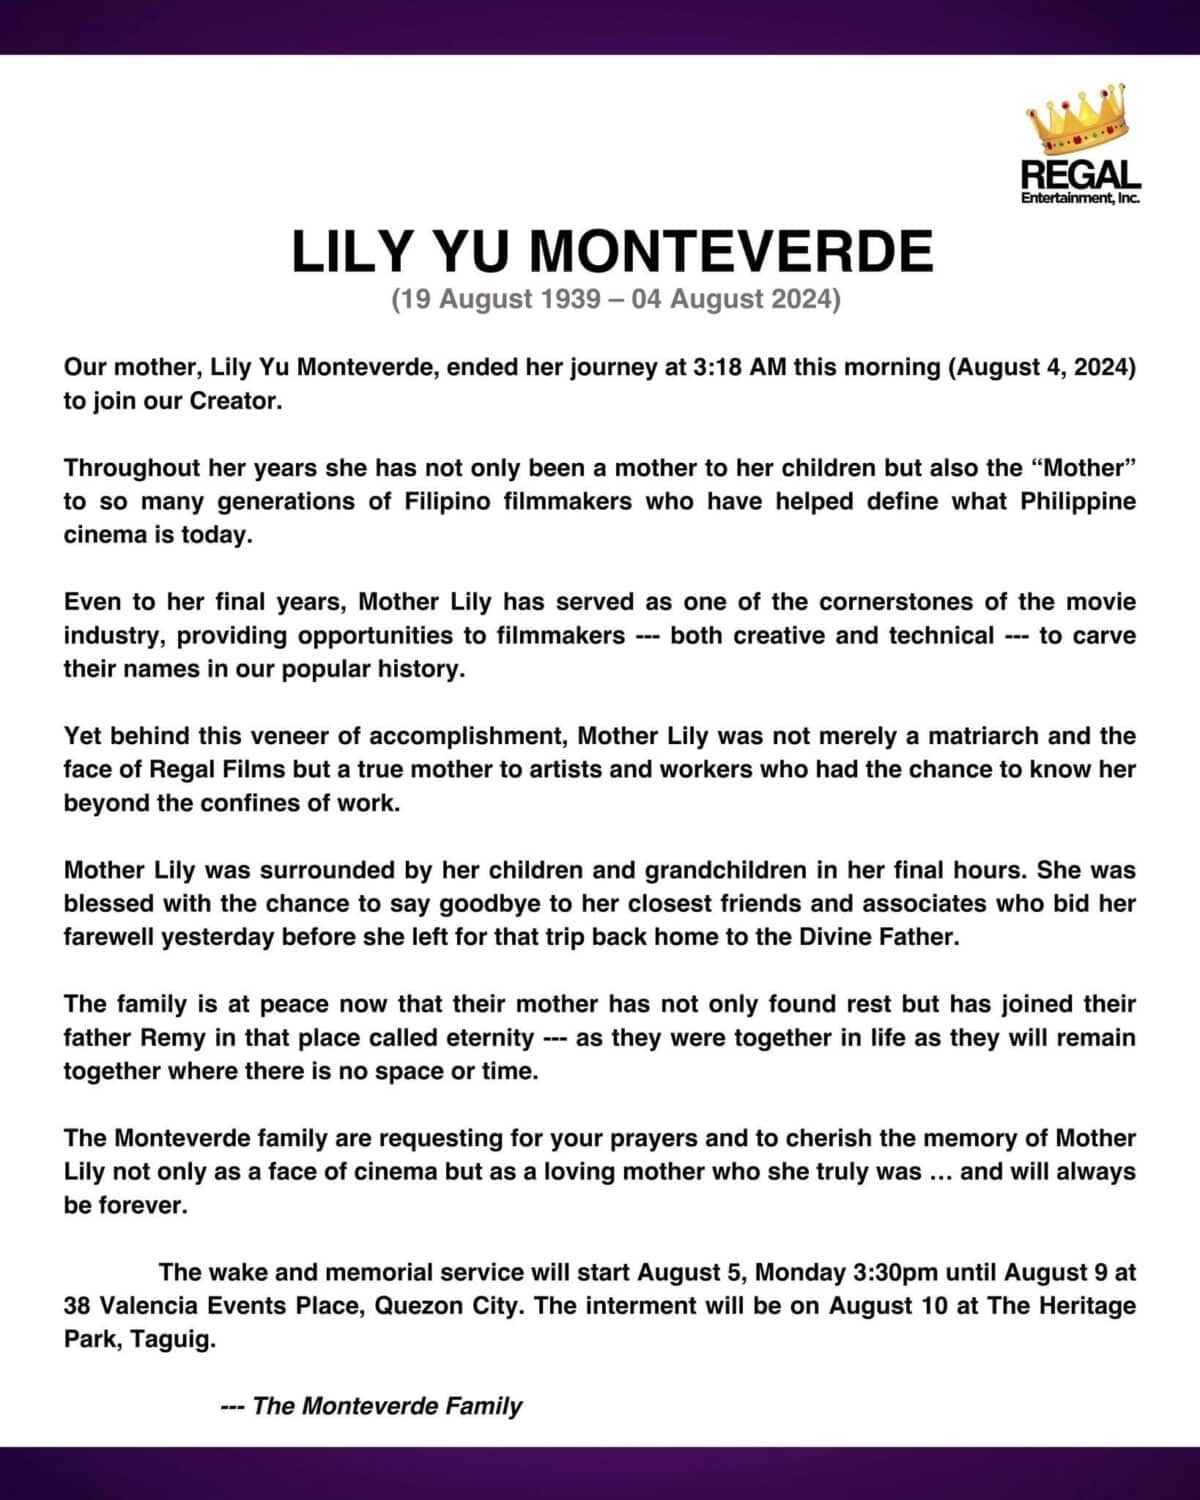 Regal Entertainment issued a statement on the death of Mother Lily Monteverde. Image: Facebook/Regal Entertainment